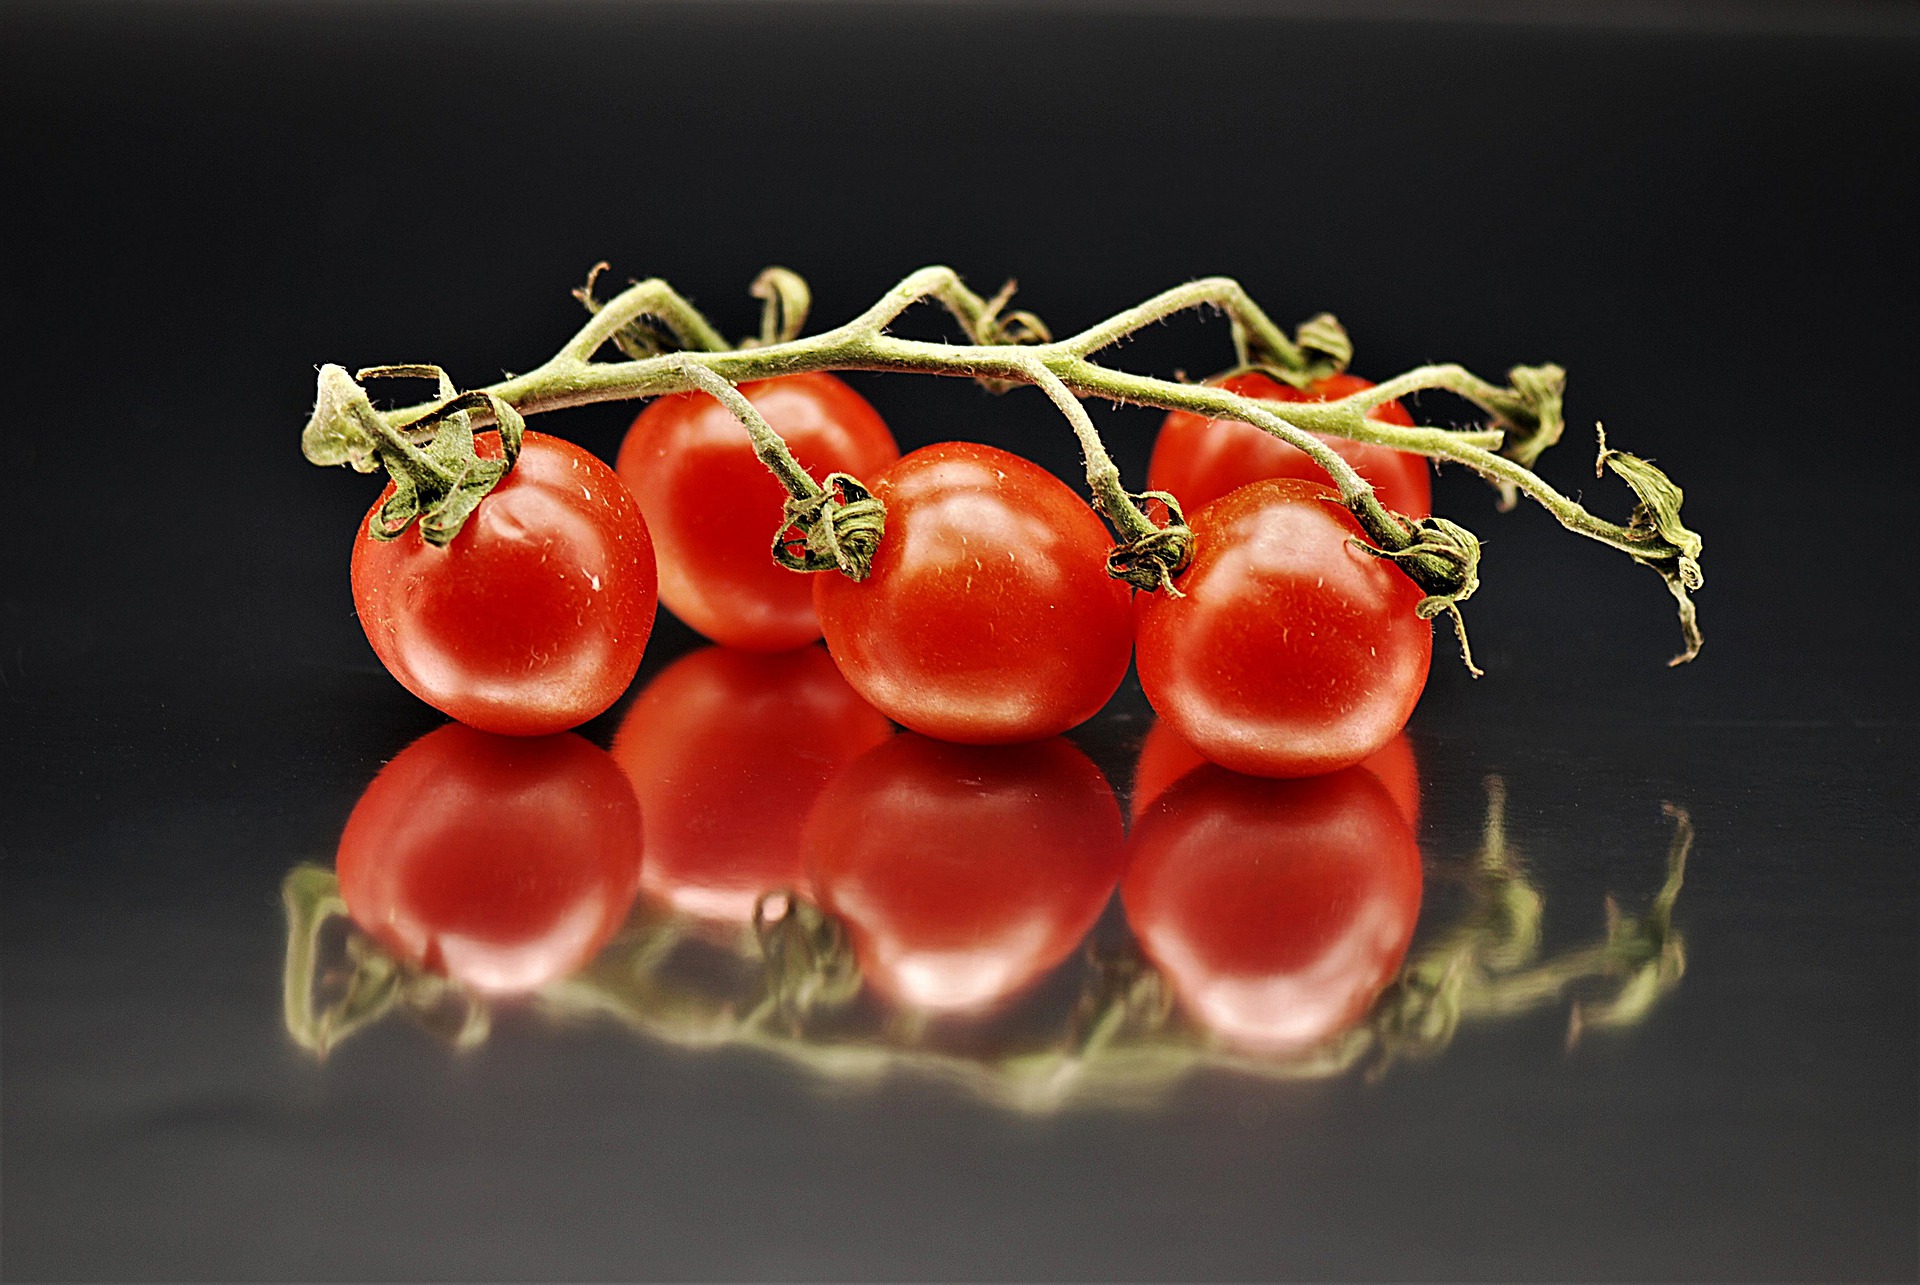 10 nutritional benefits of tomatoes